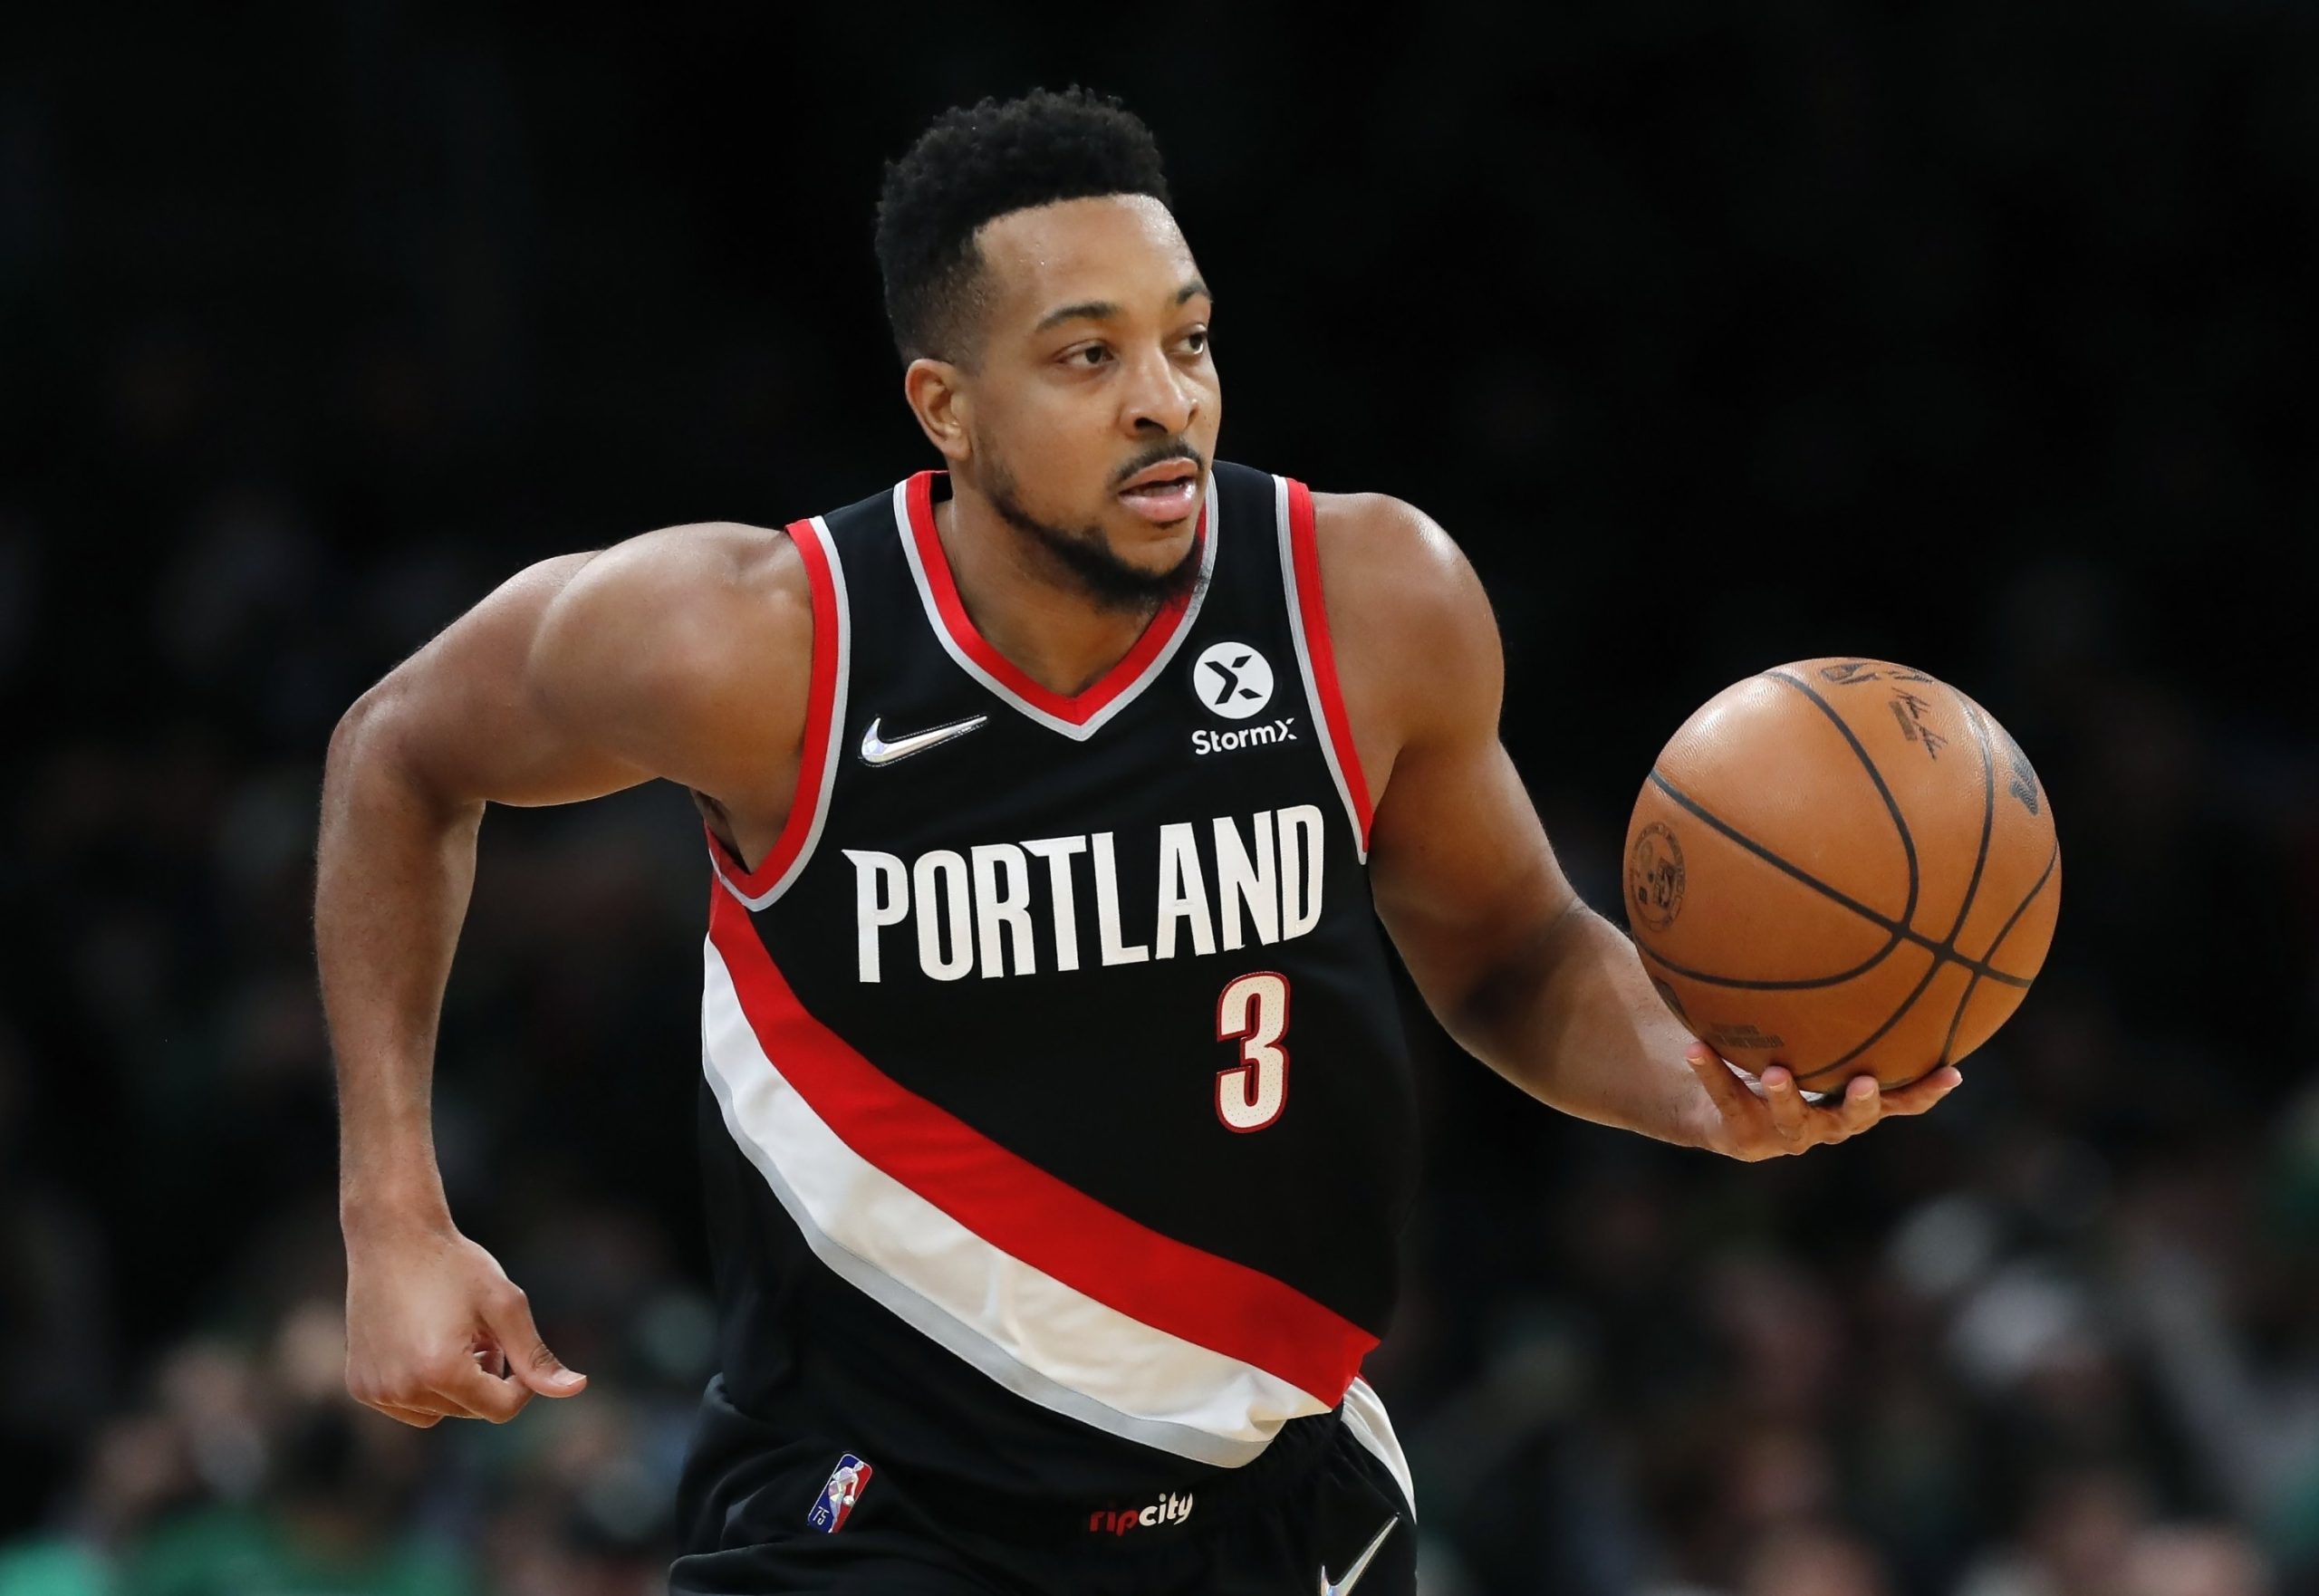 Miami Heat to Acquire CJ McCollum from the New Orleans Pelicans in a Striking Trade Proposal